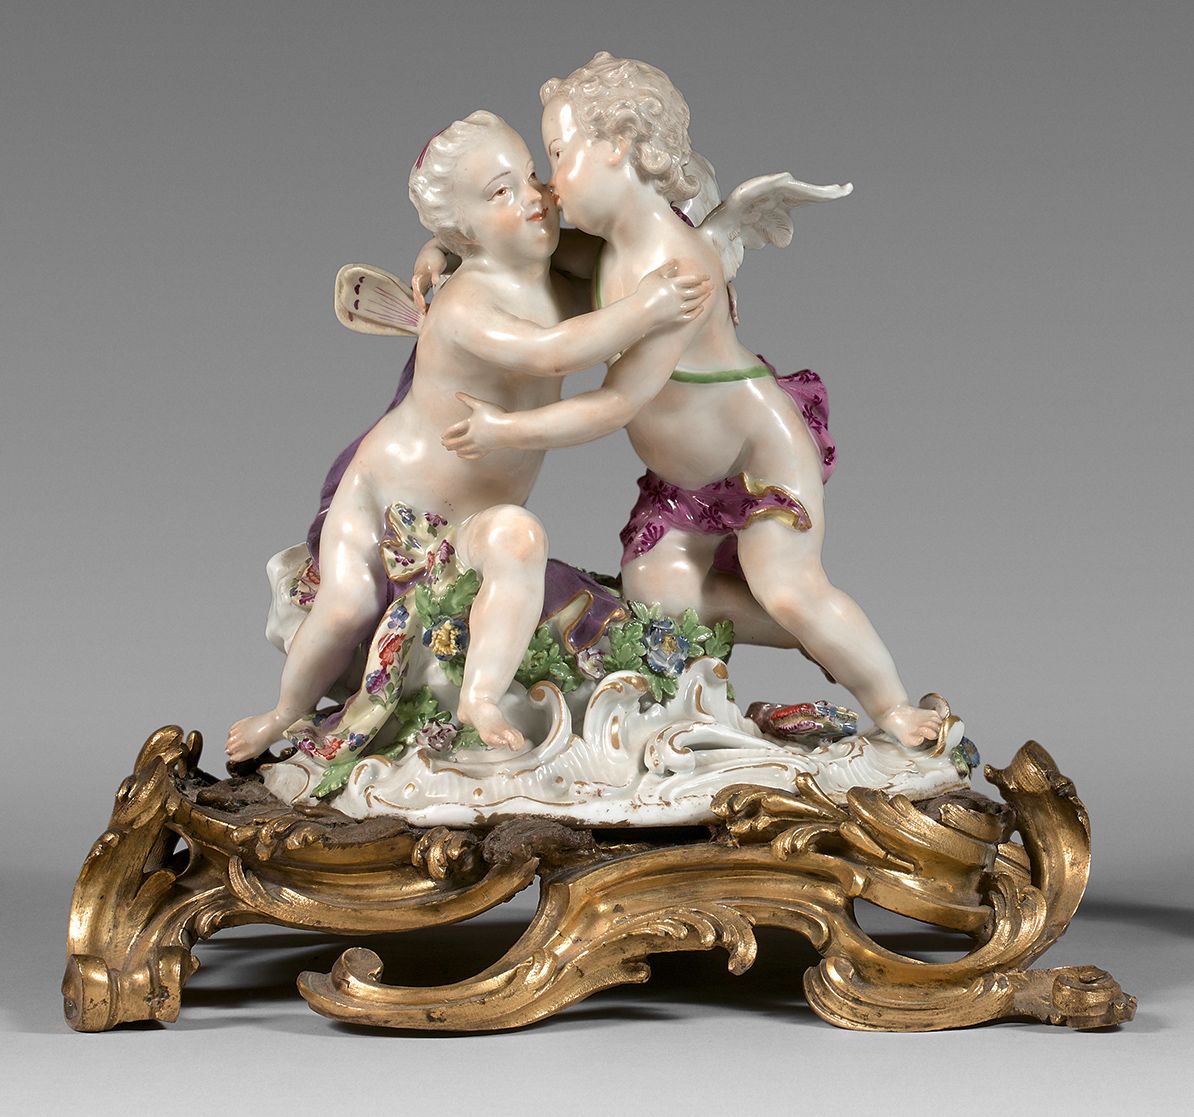 MEISSEN Large group formed of two draped lovers embracing, resting on an oval ro&hellip;